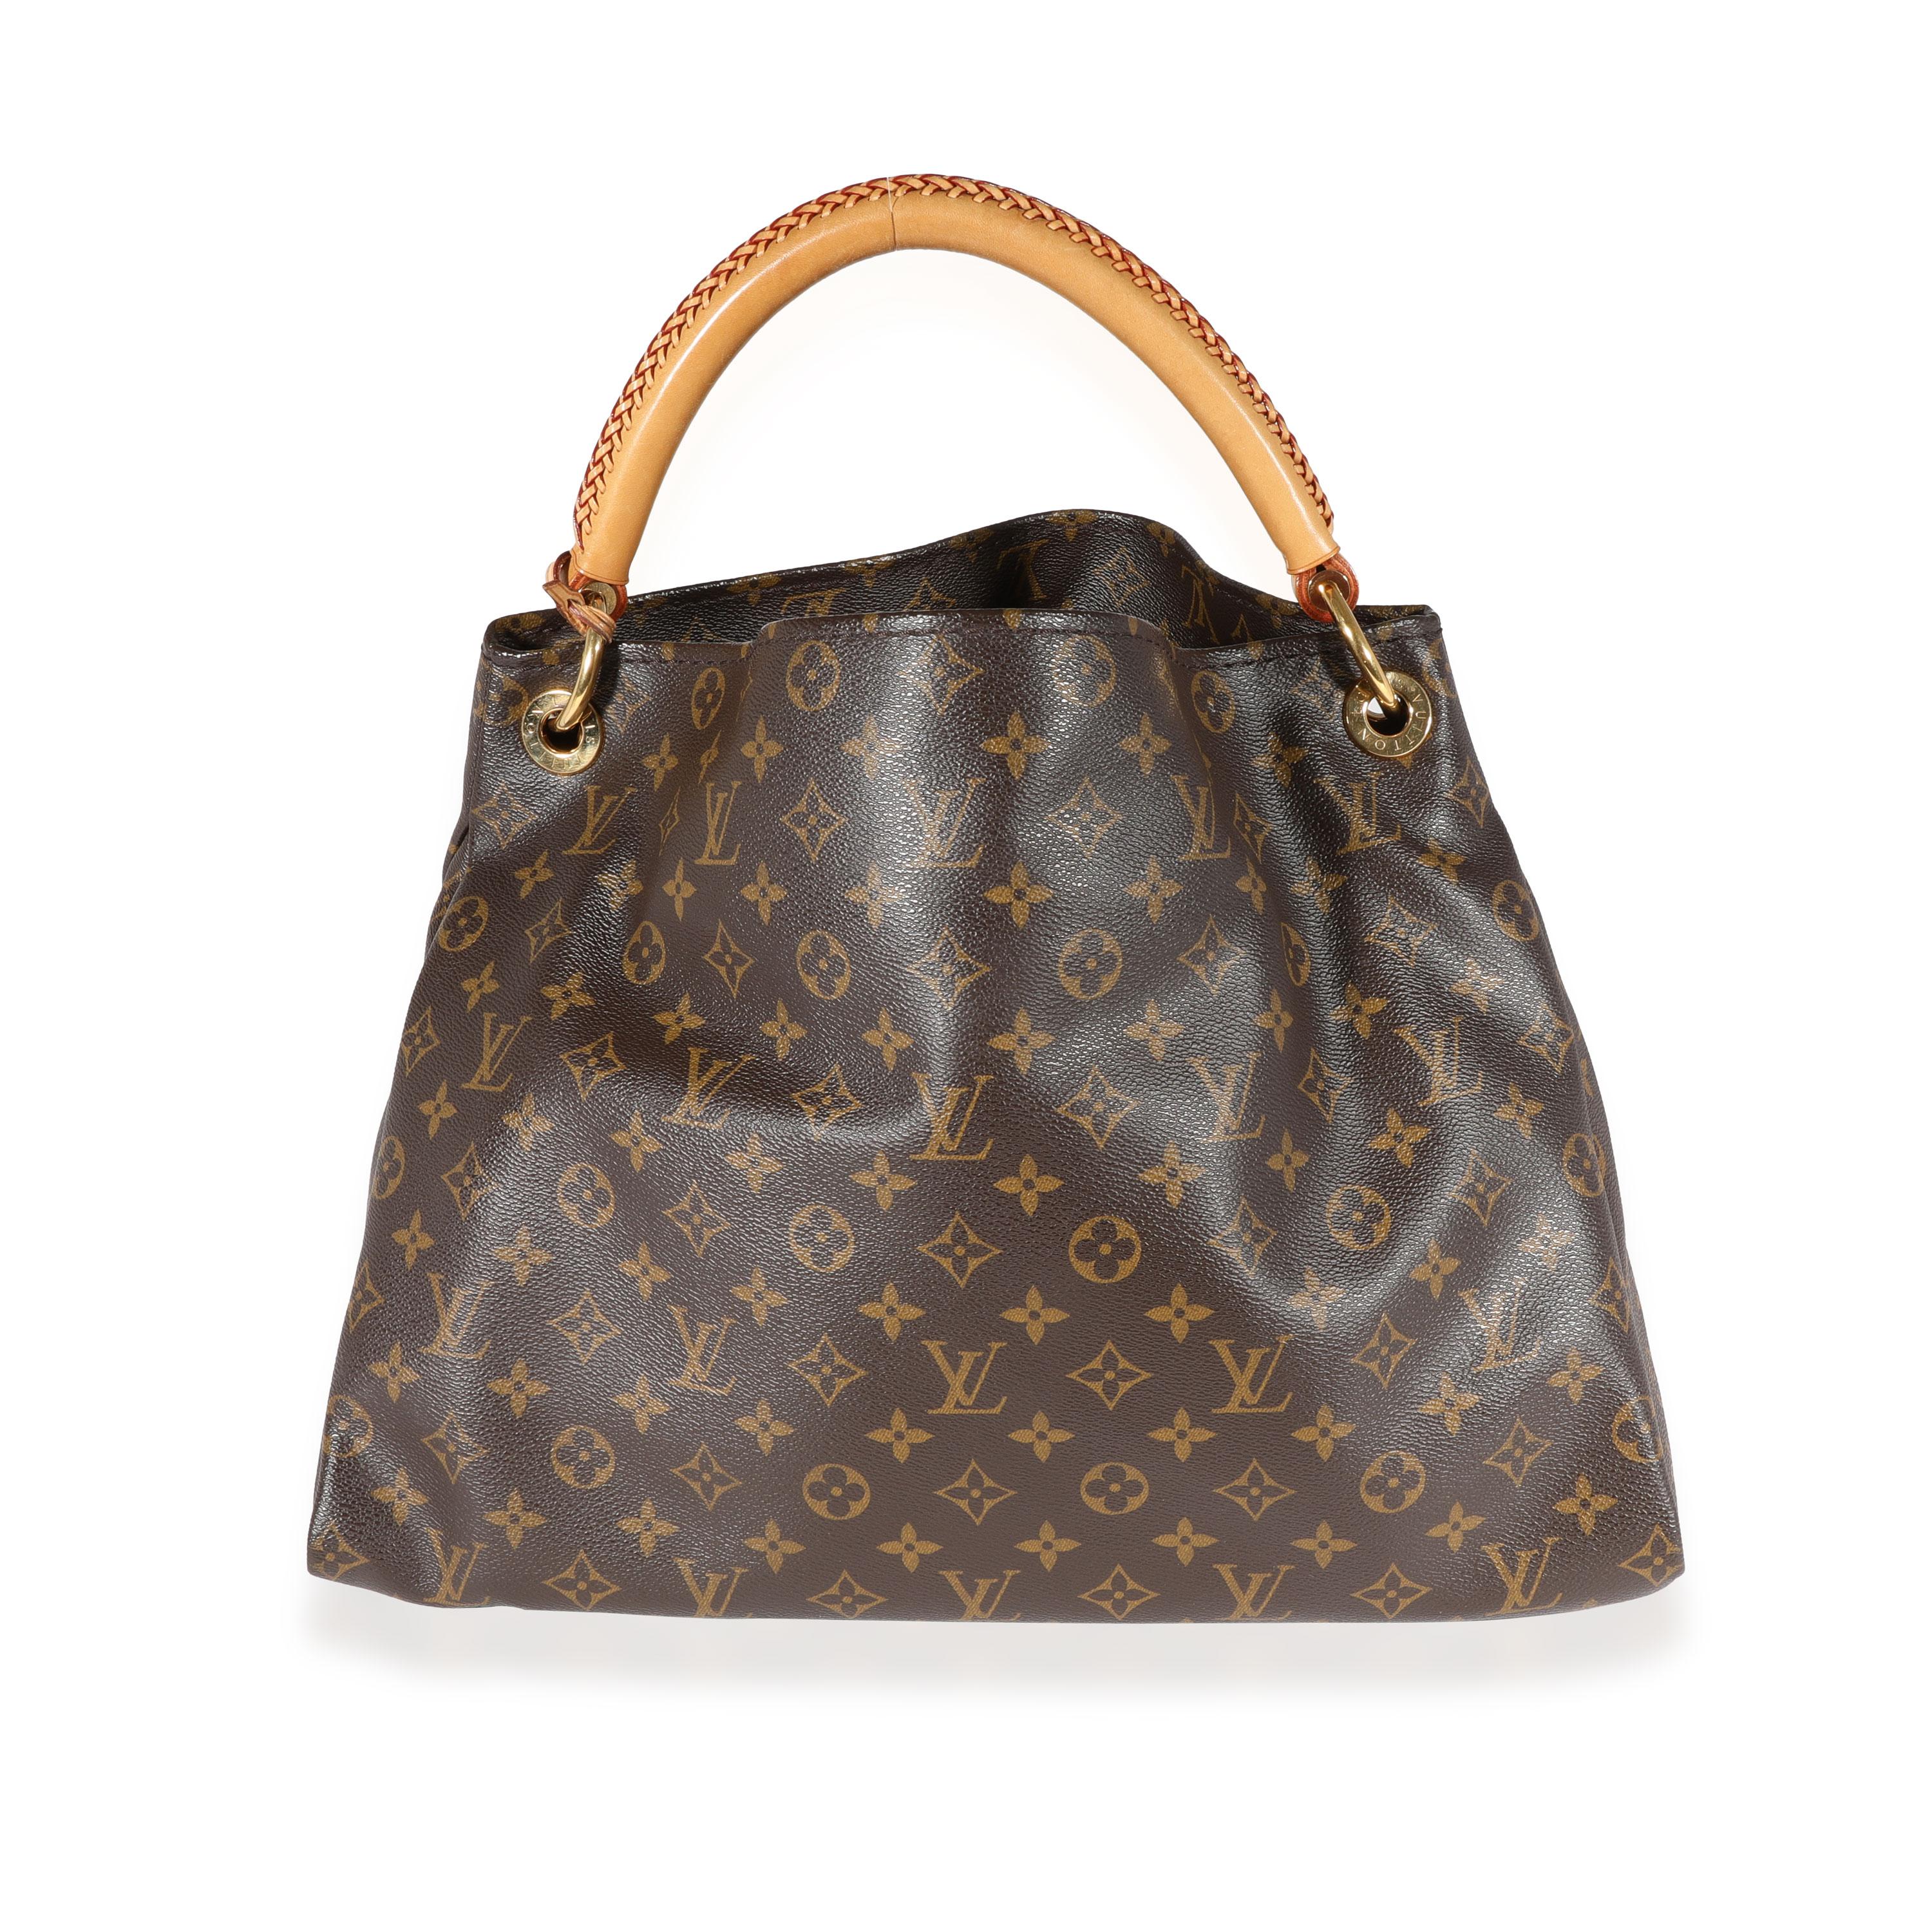 Listing Title: Louis Vuitton Monogram Canvas Artsy MM
SKU: 121979
MSRP: 2500.00
Condition: Pre-owned 
Handbag Condition: Very Good
Condition Comments: Very Good Condition. Patina and marks to handle Scuffing and marks at exterior. Scratching and